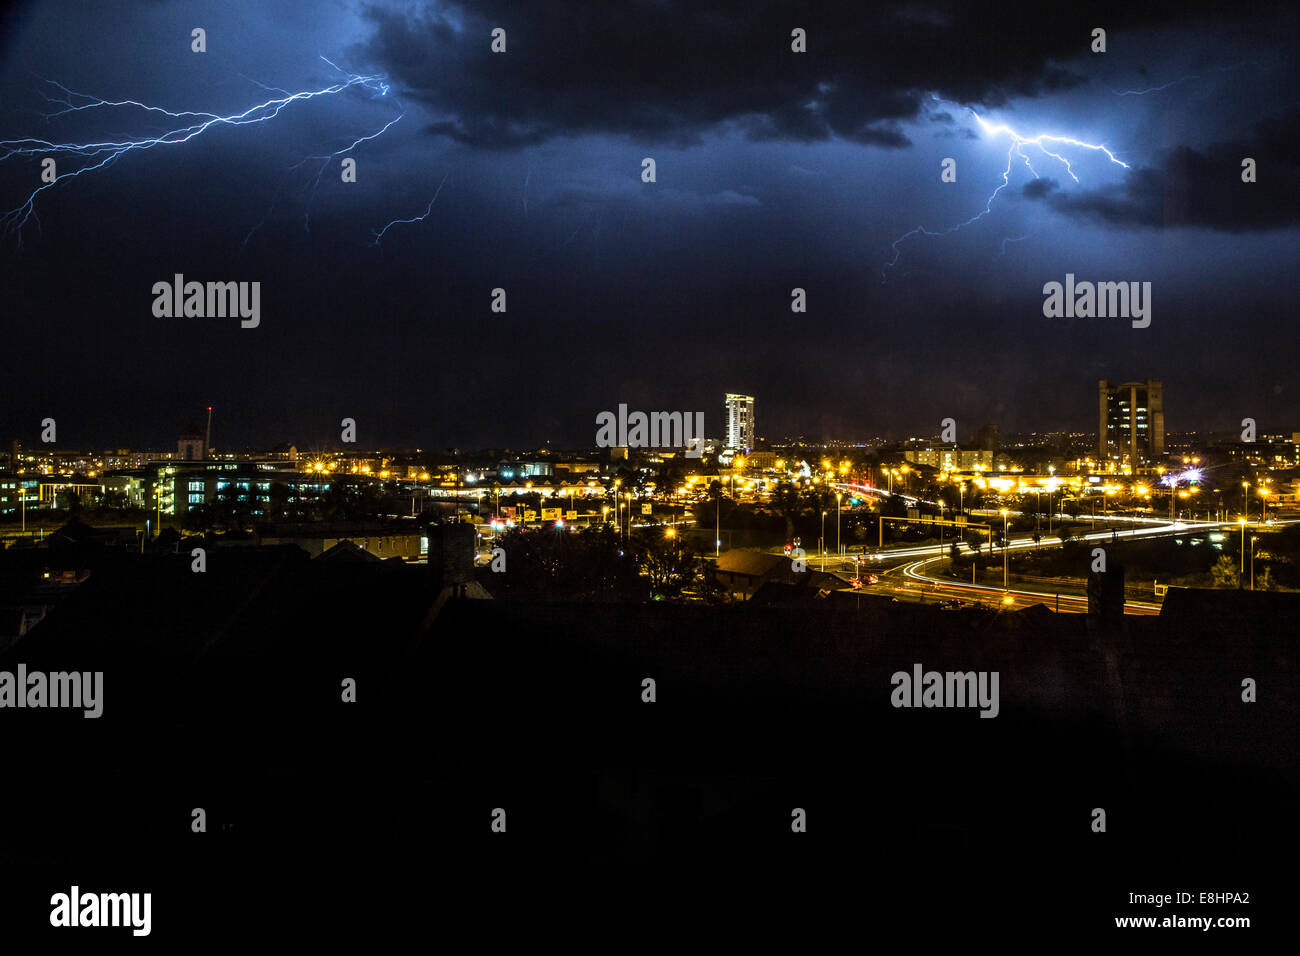 Electrical storm over Swansea Bay, fork lightning display at night over Swansea city centre Stock Photo